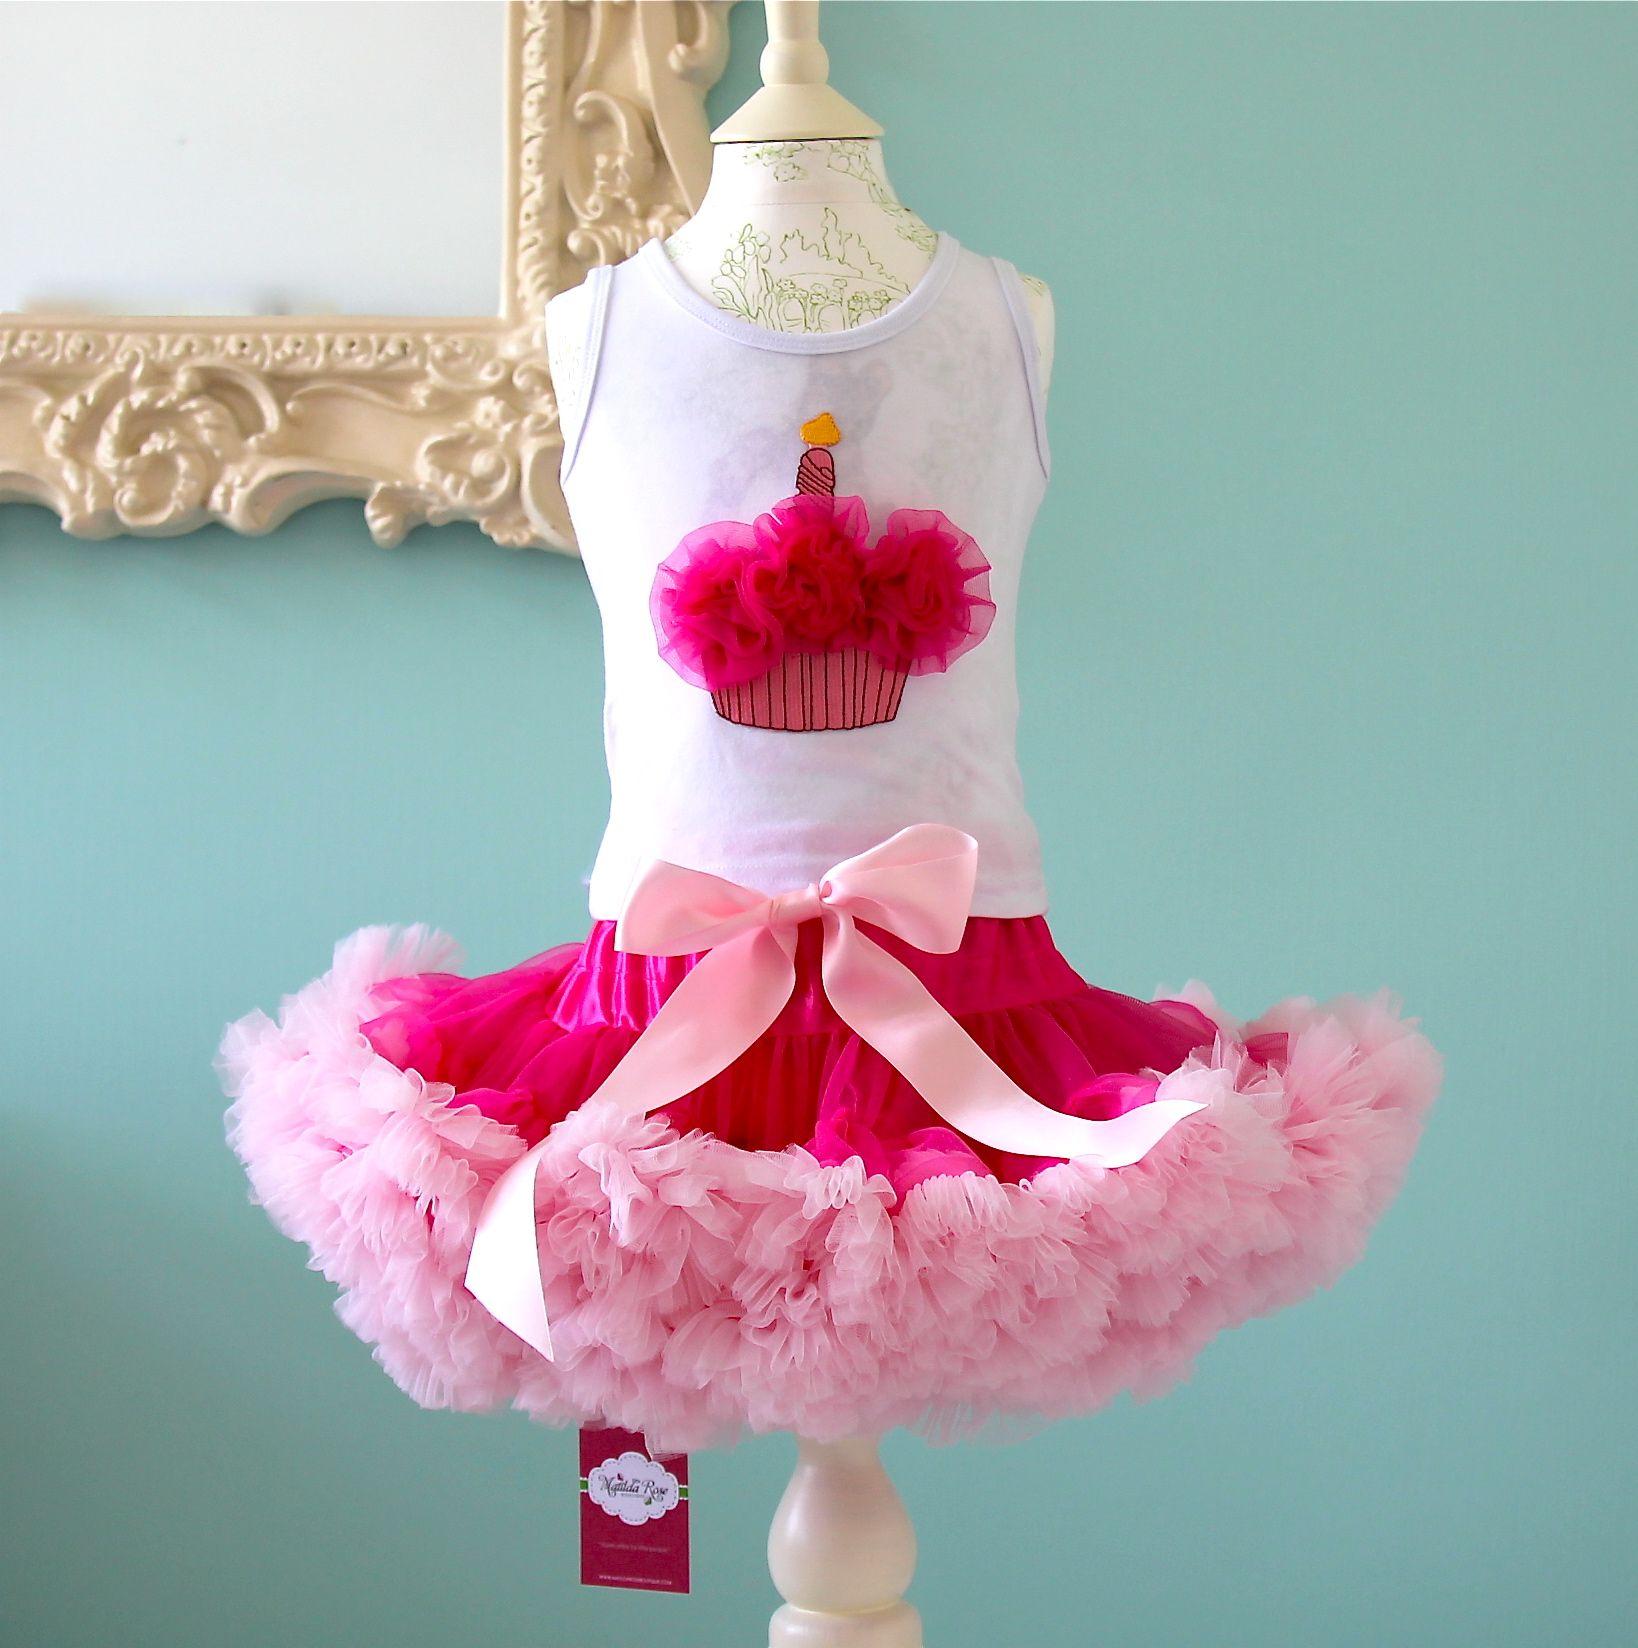 Among the most popular party wear brands is Pettiskirts.